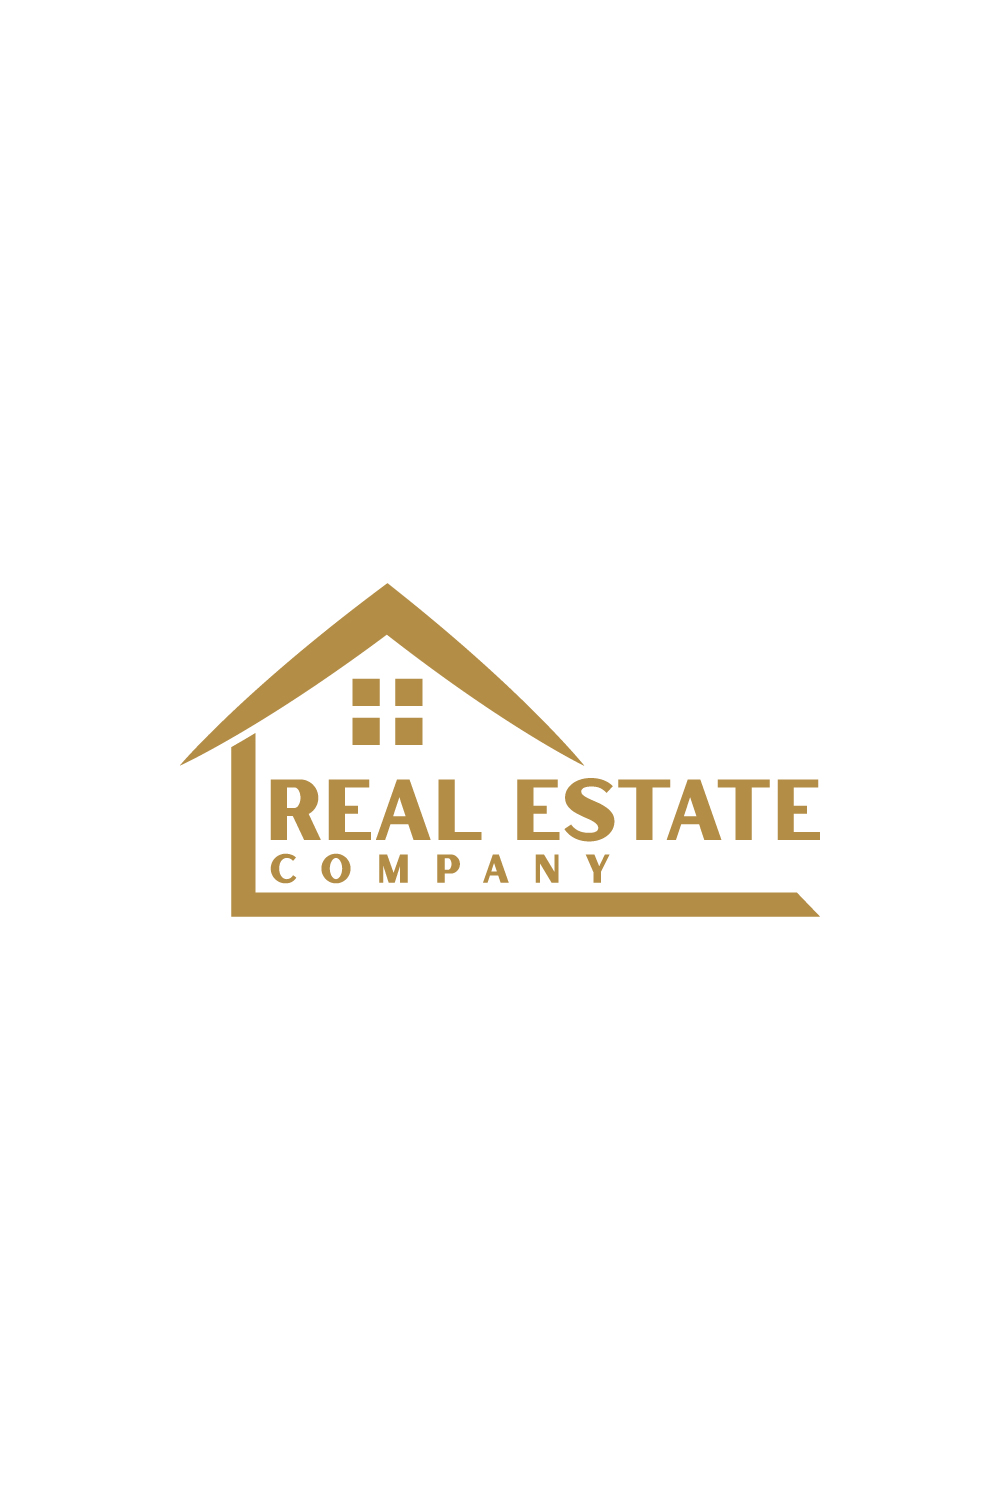 Real estate logo with Golden color pinterest preview image.